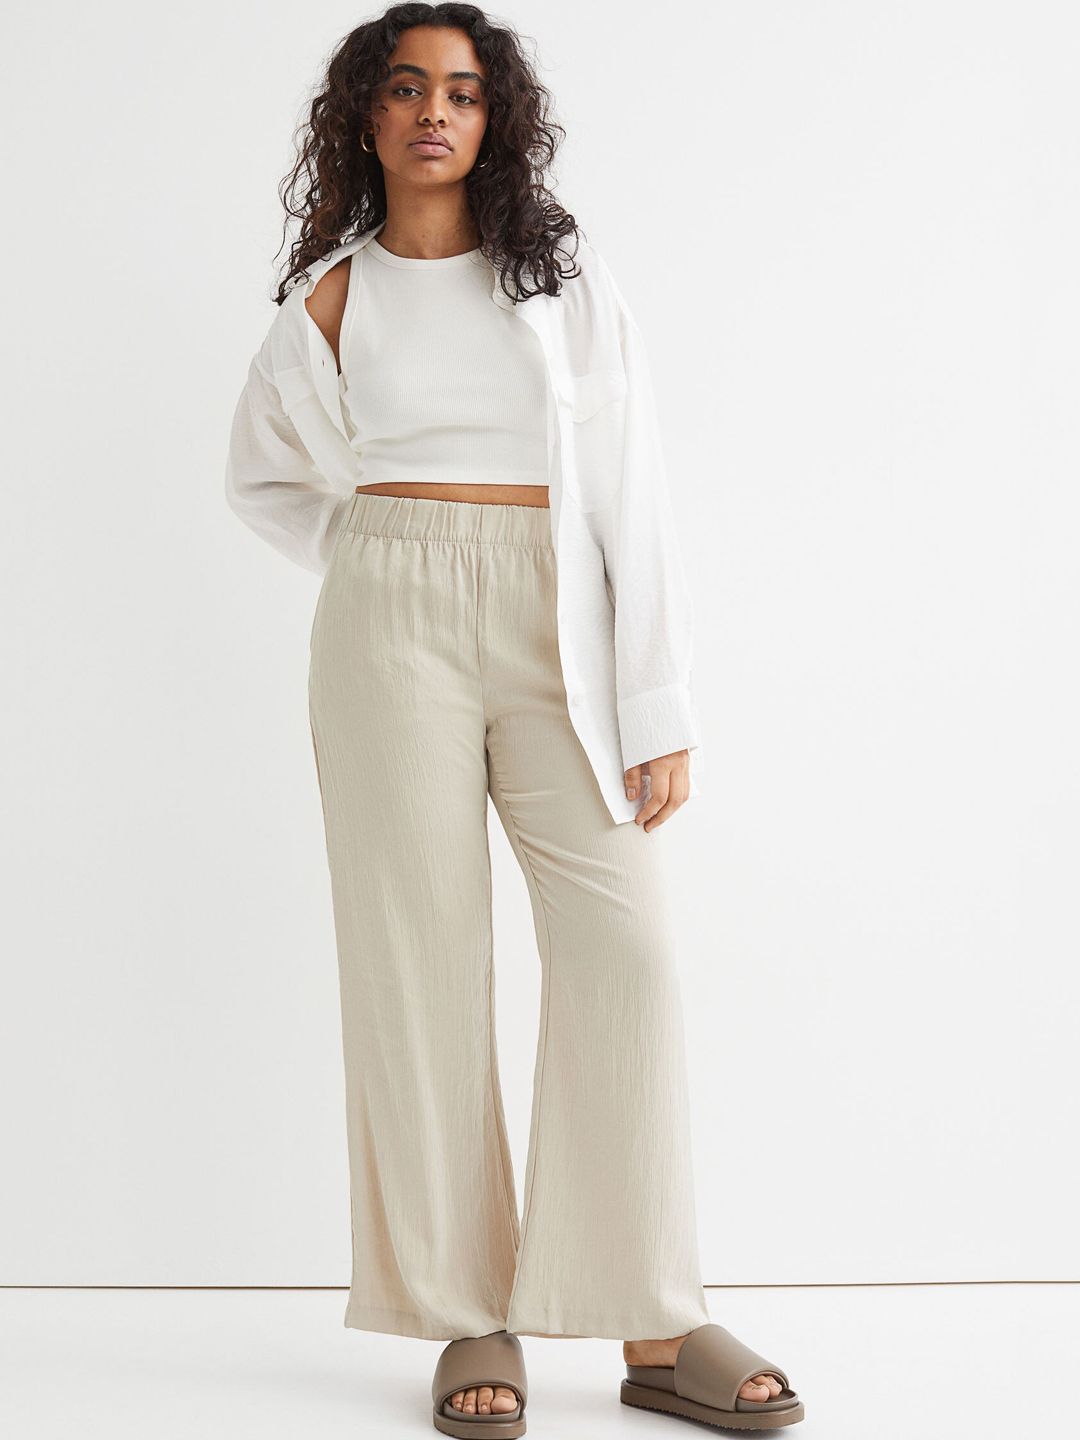 H&M Women Beige Solid Crinkled Trousers Price in India